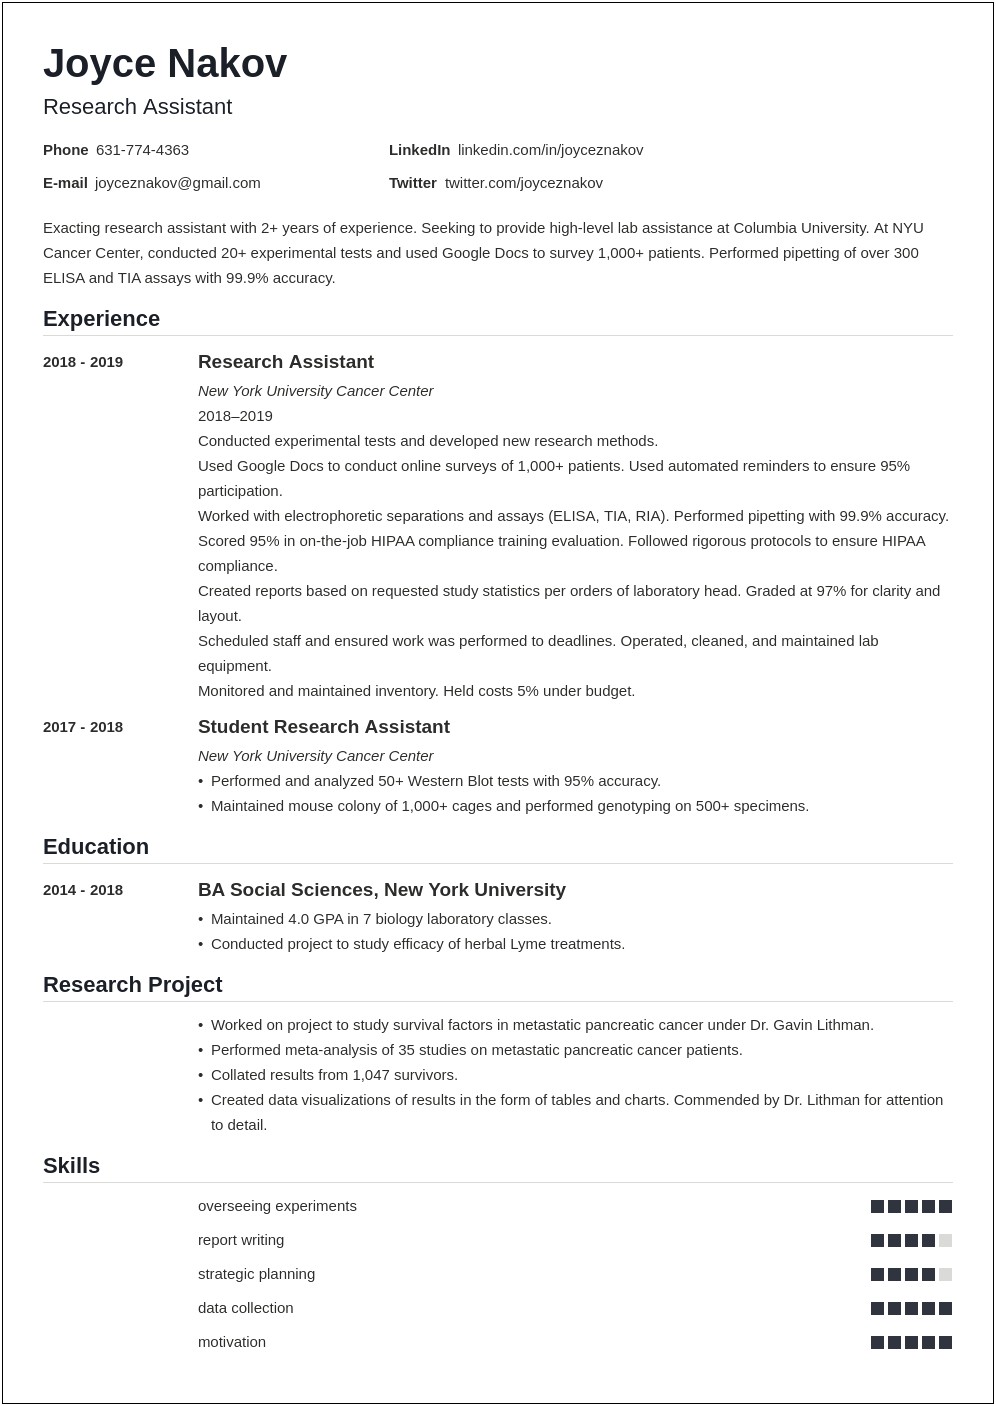 Skills To Include For Research Resume